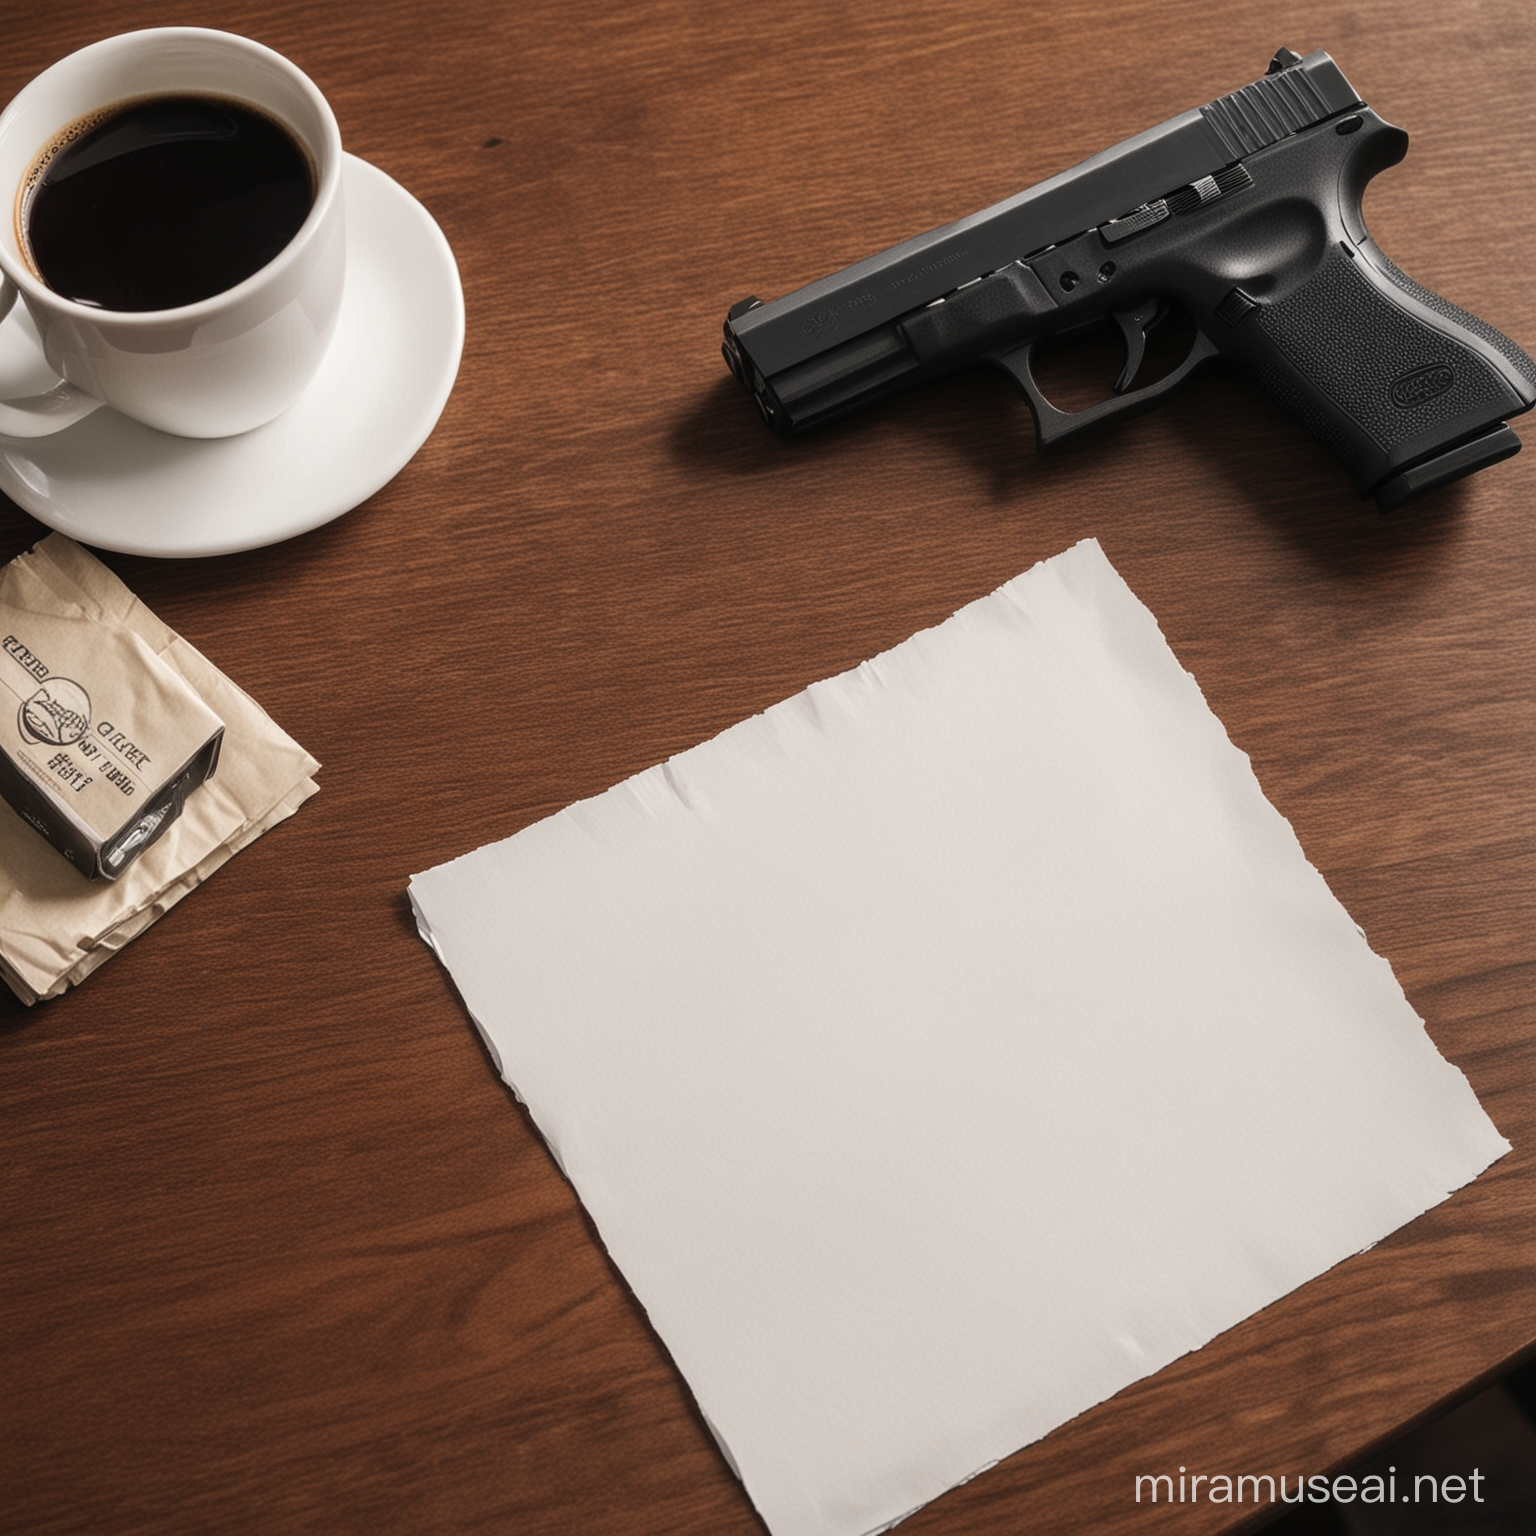 Coffee Break Contemplation Empty Paper and a Glock Pistol on Dining Table